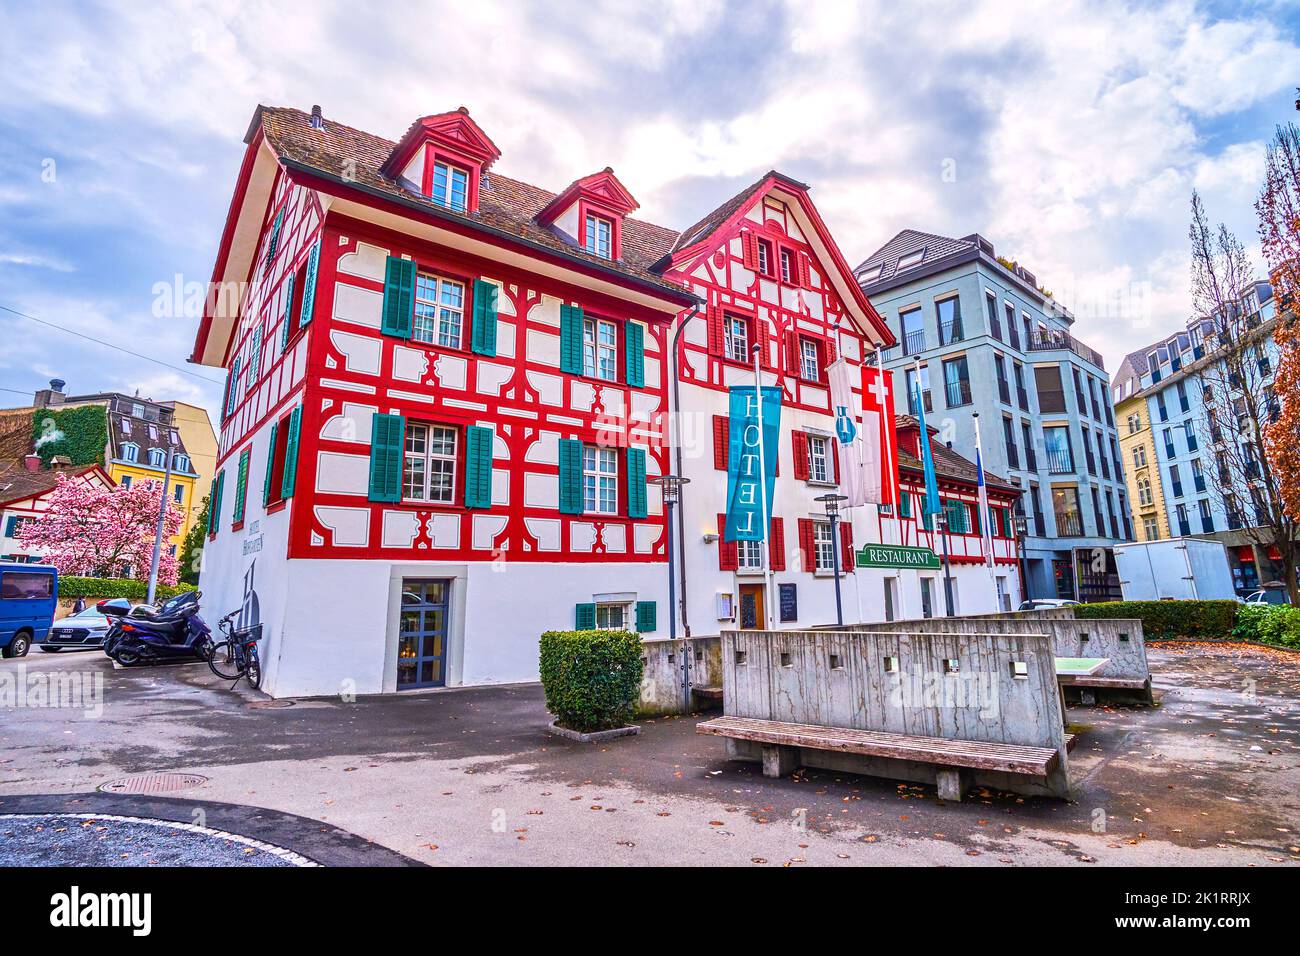 LUCERNE, SWITZERLAND - MARCH 30, 2022: St The scenic historic half-timbered house, serves as hotel and restaurant, on March 30 in Lucerne, Switzerland Stock Photo